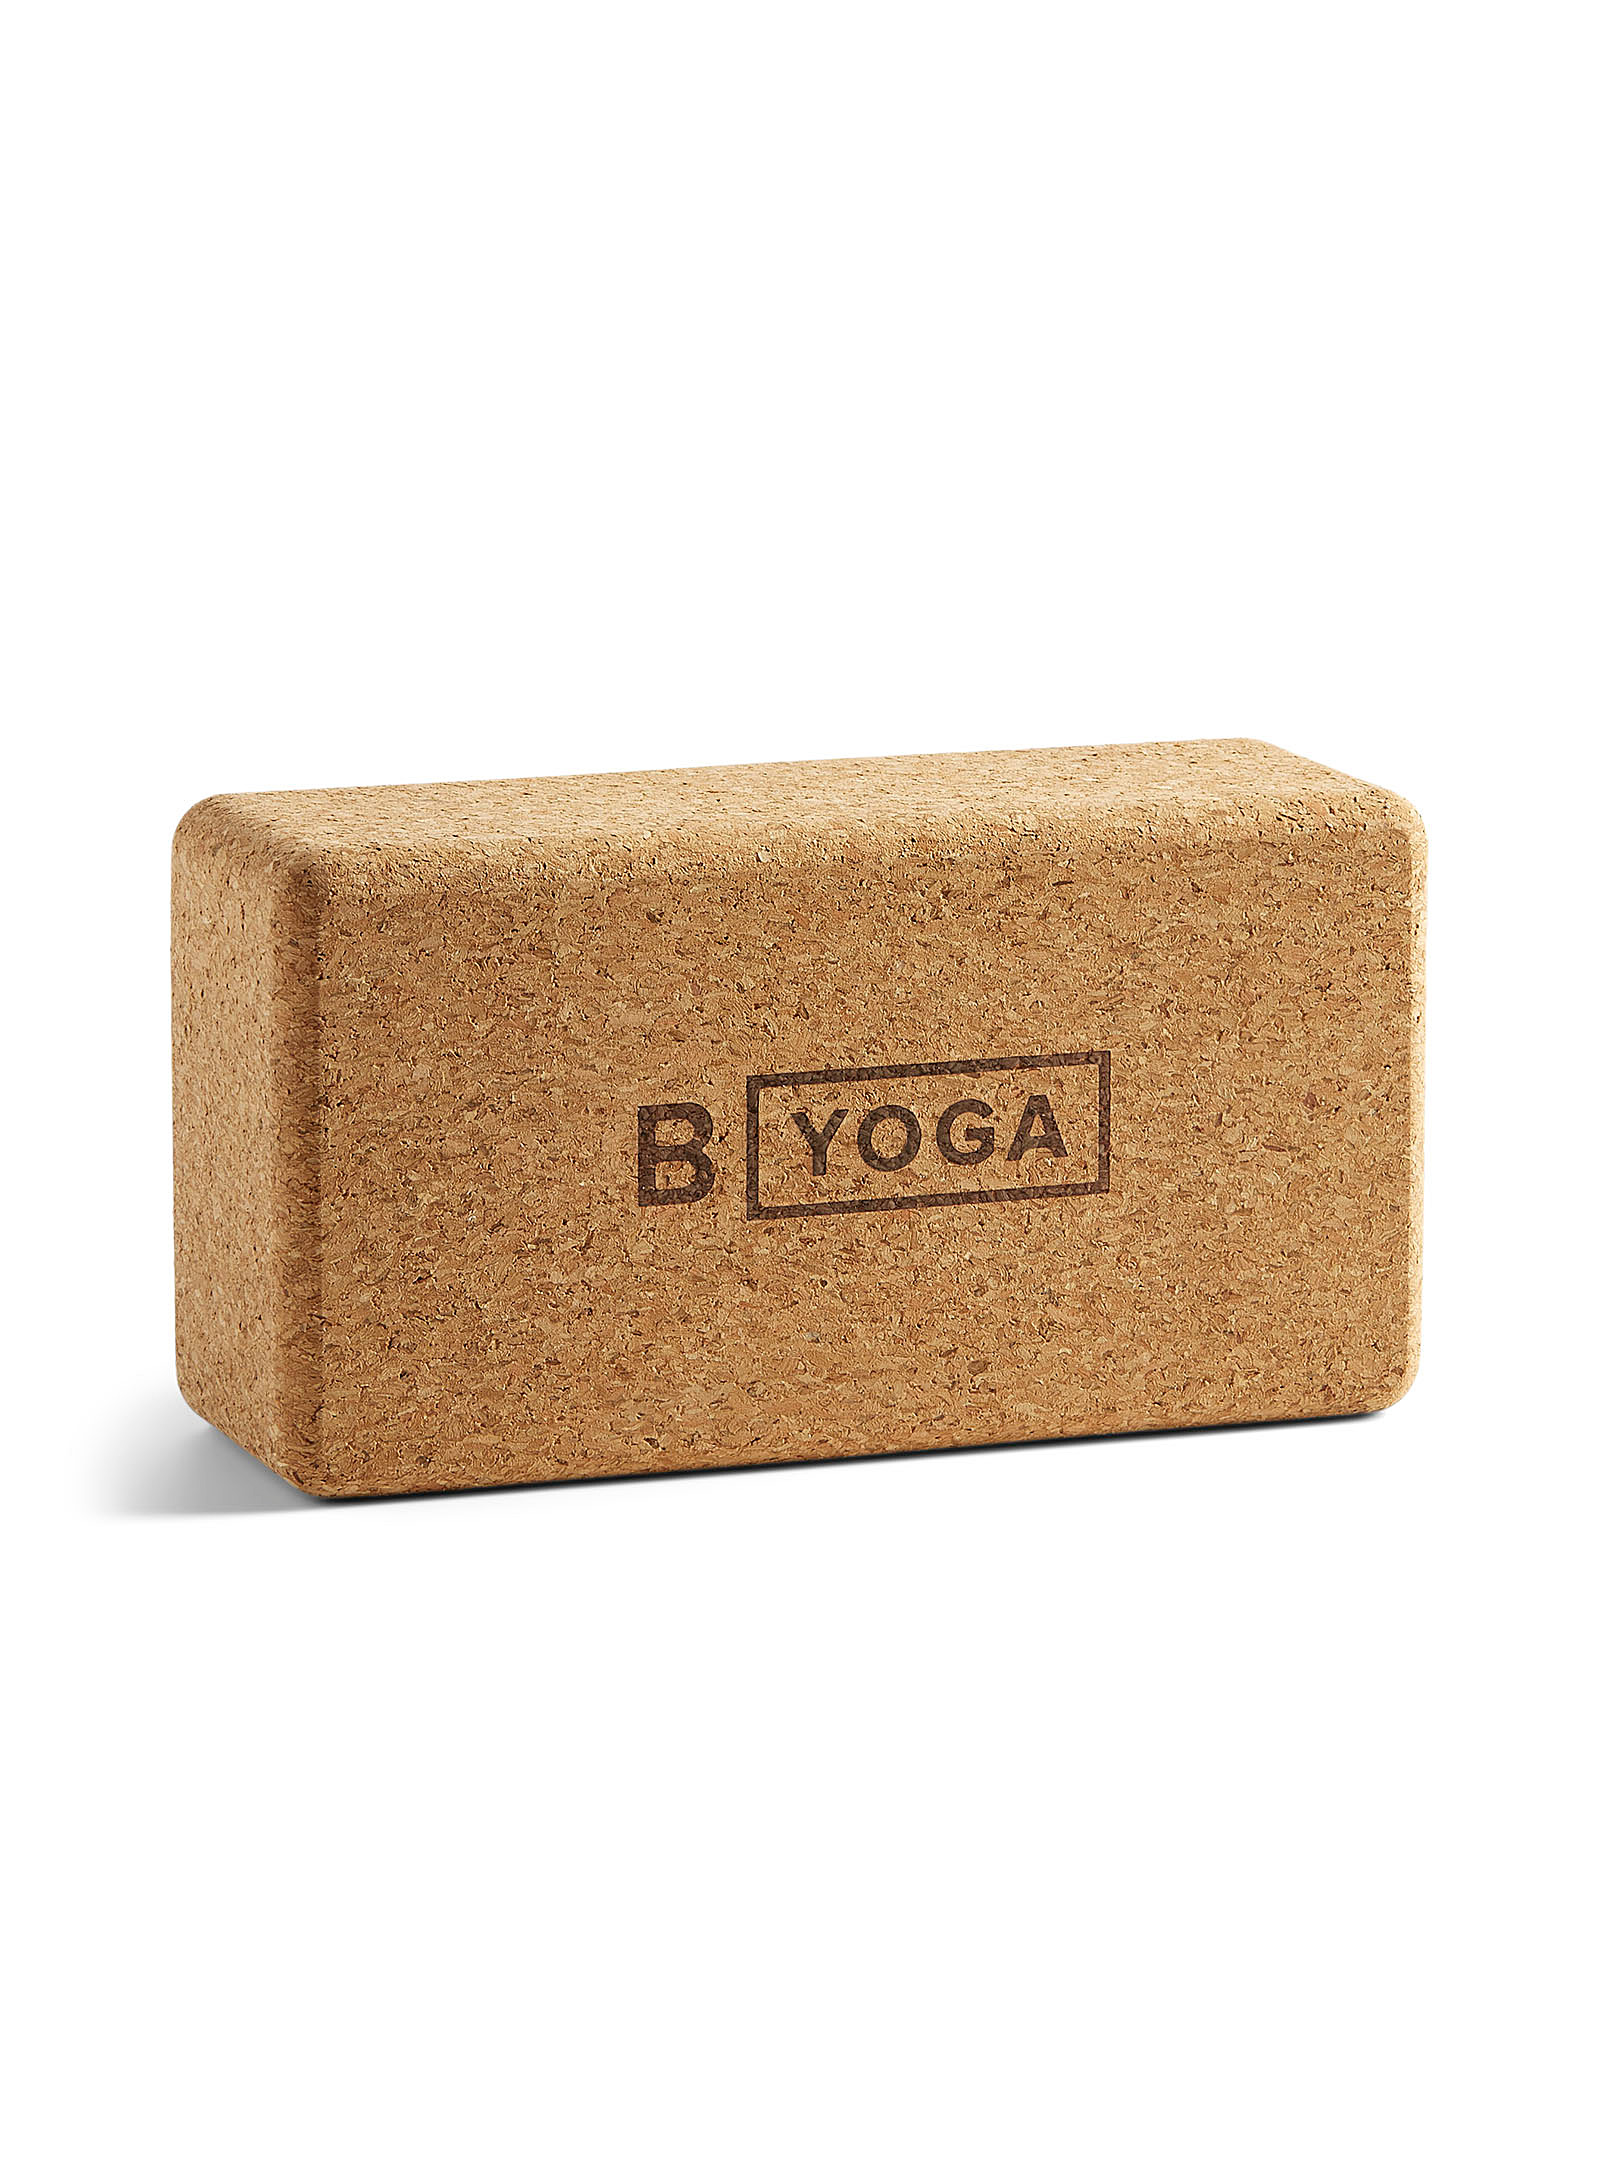 B Yoga Cork Firm Support Block In Brown